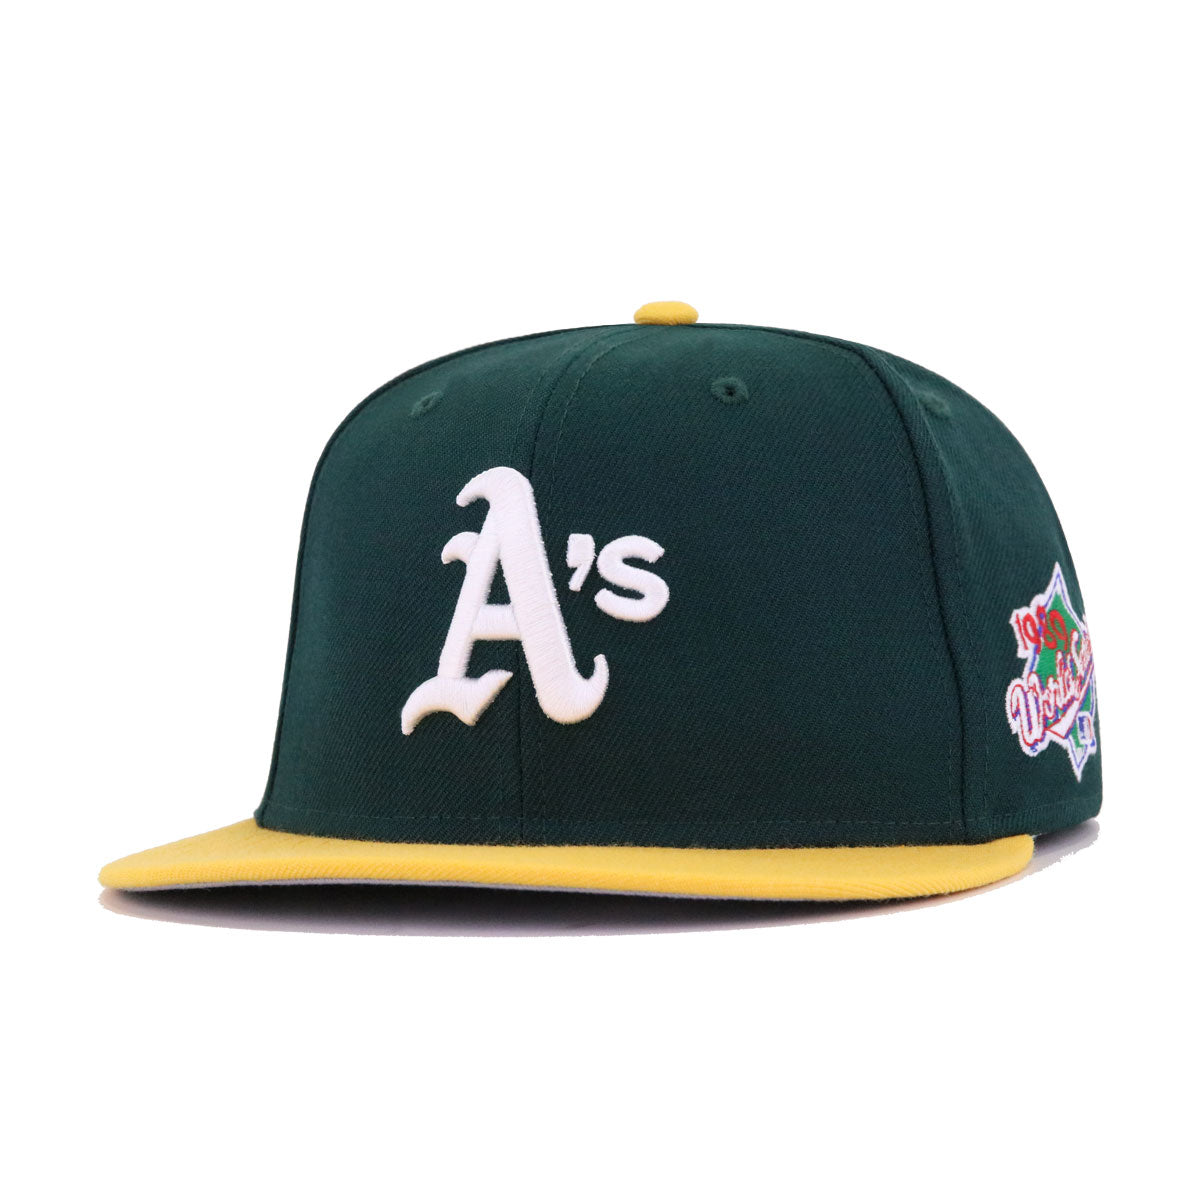 Shop Oakland Athletics Snapback Hats & Fitted Caps